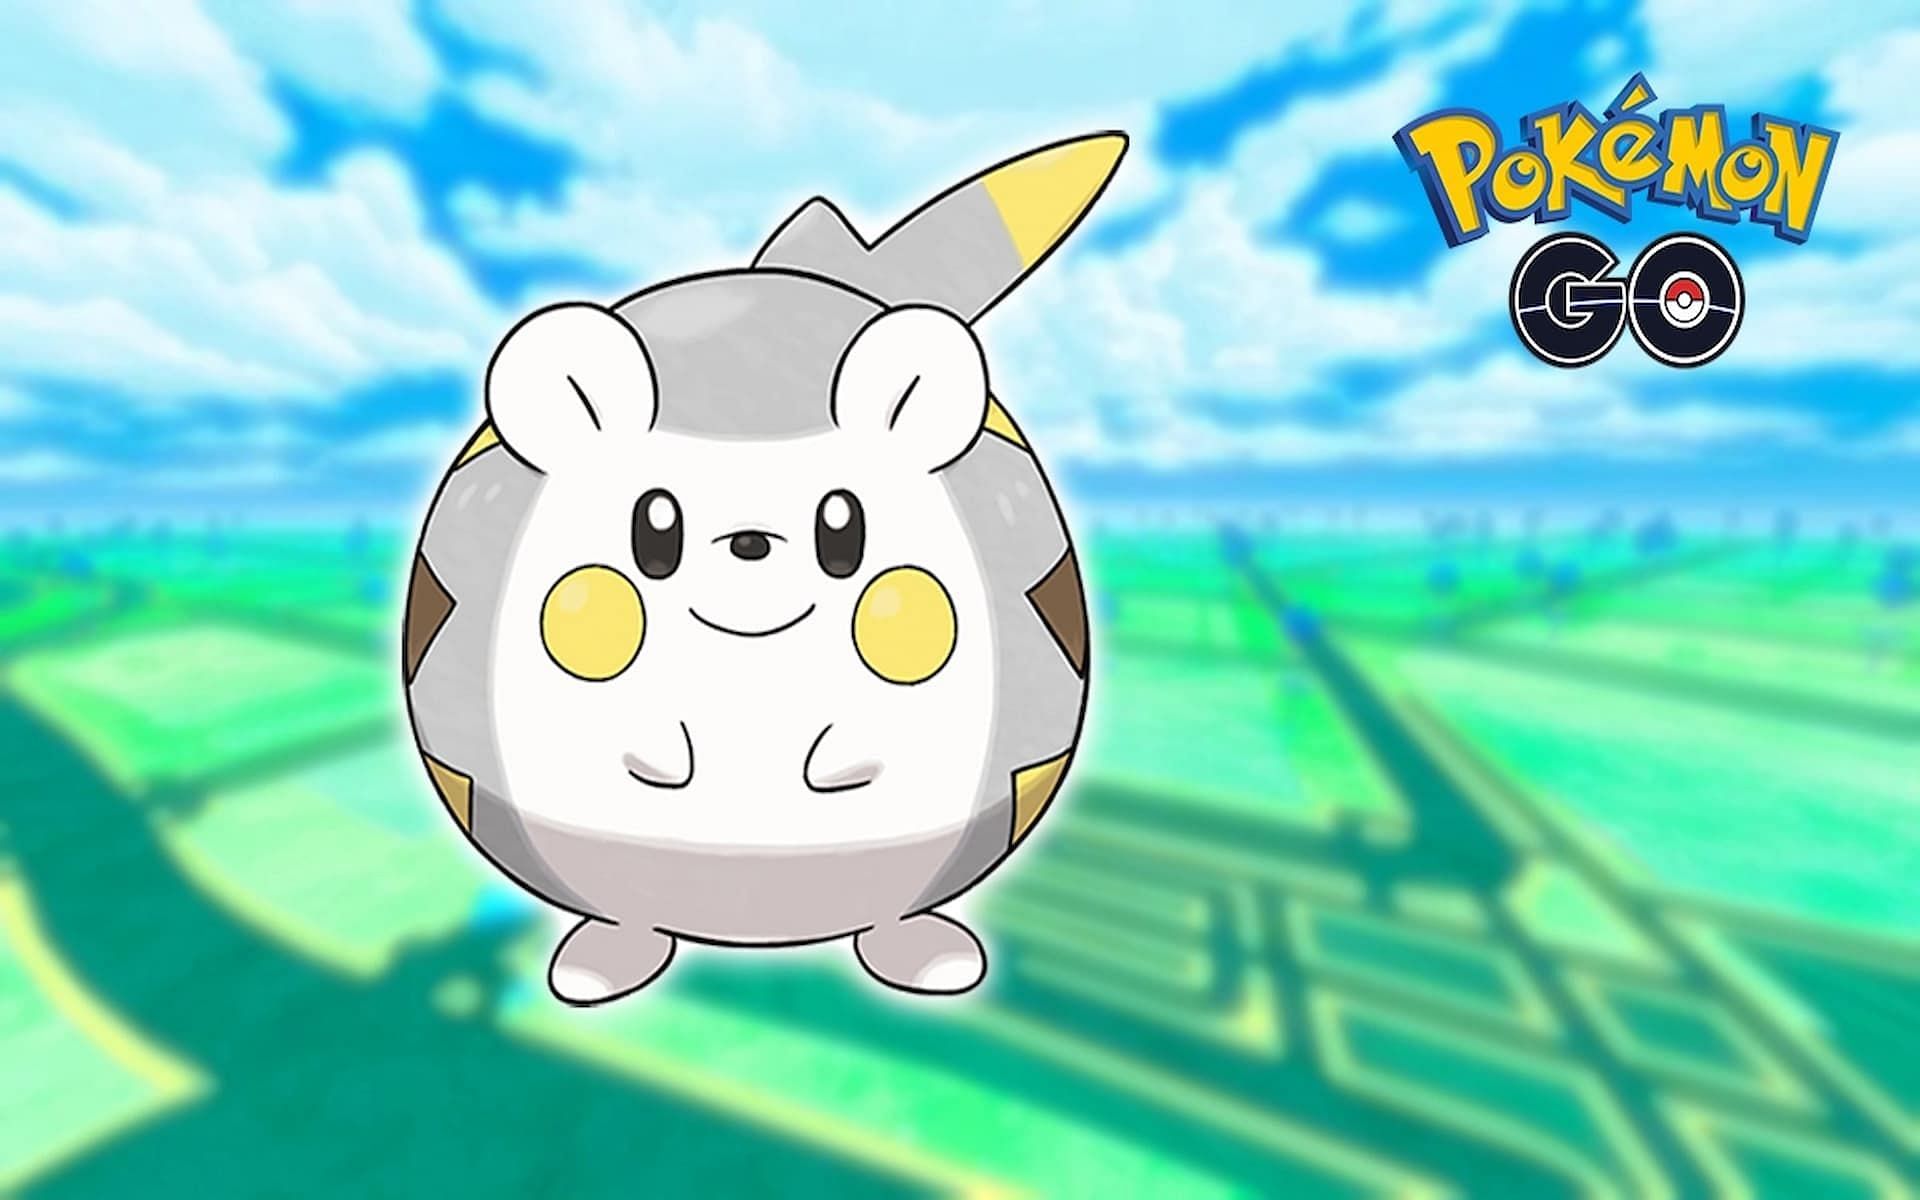 Pokemon GO Togedemaru guide: Best counters, weaknesses, & more